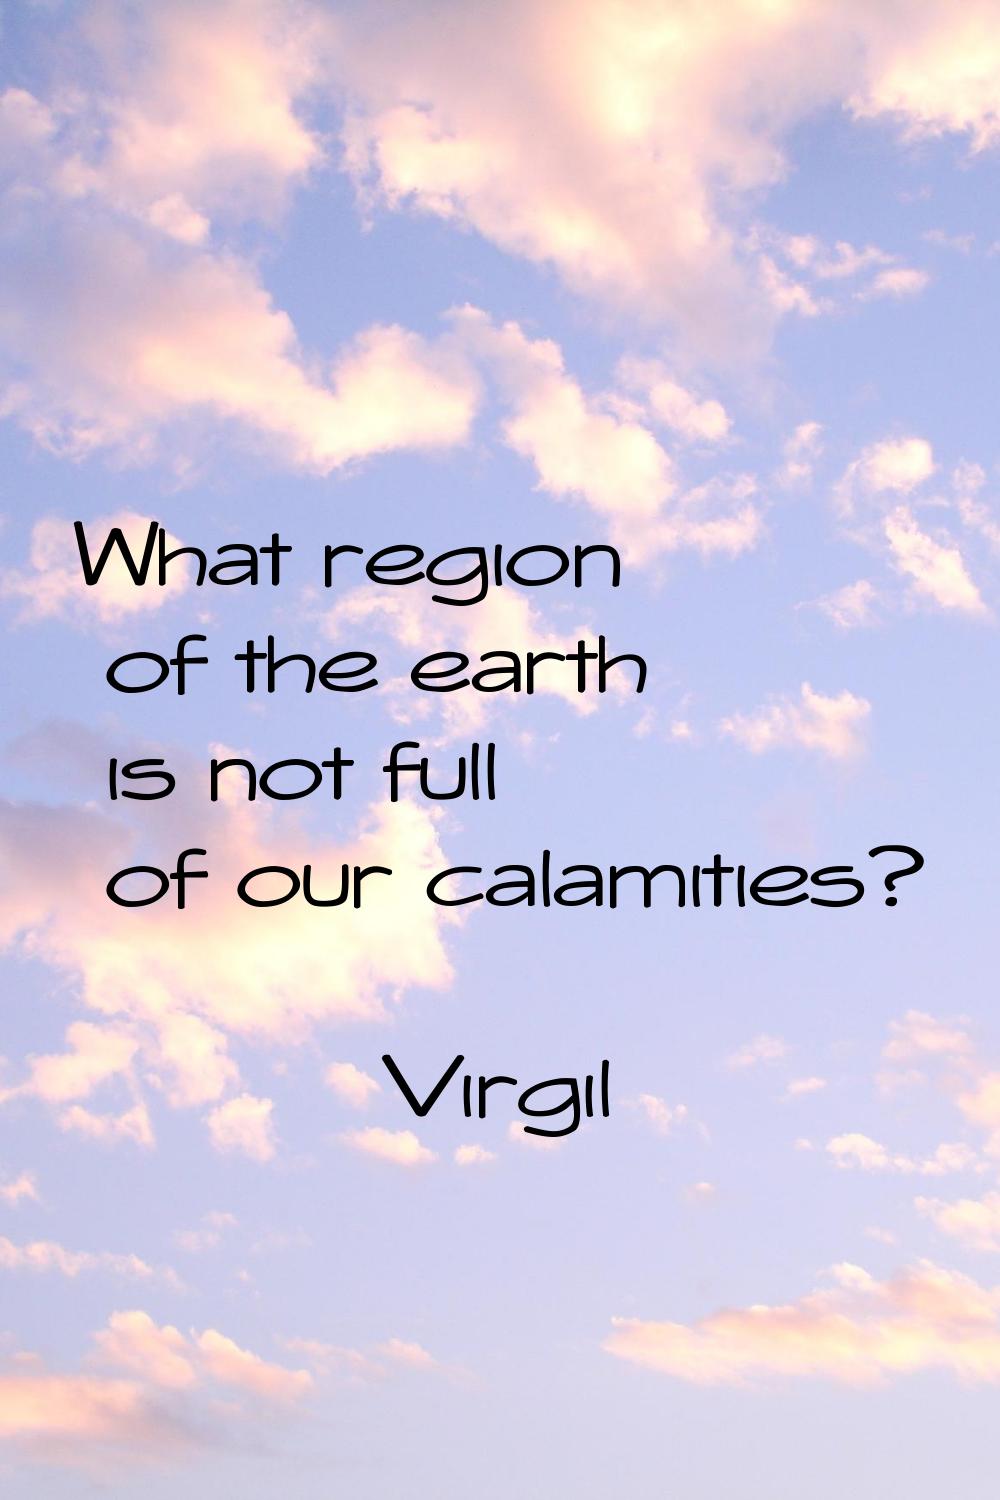 What region of the earth is not full of our calamities?